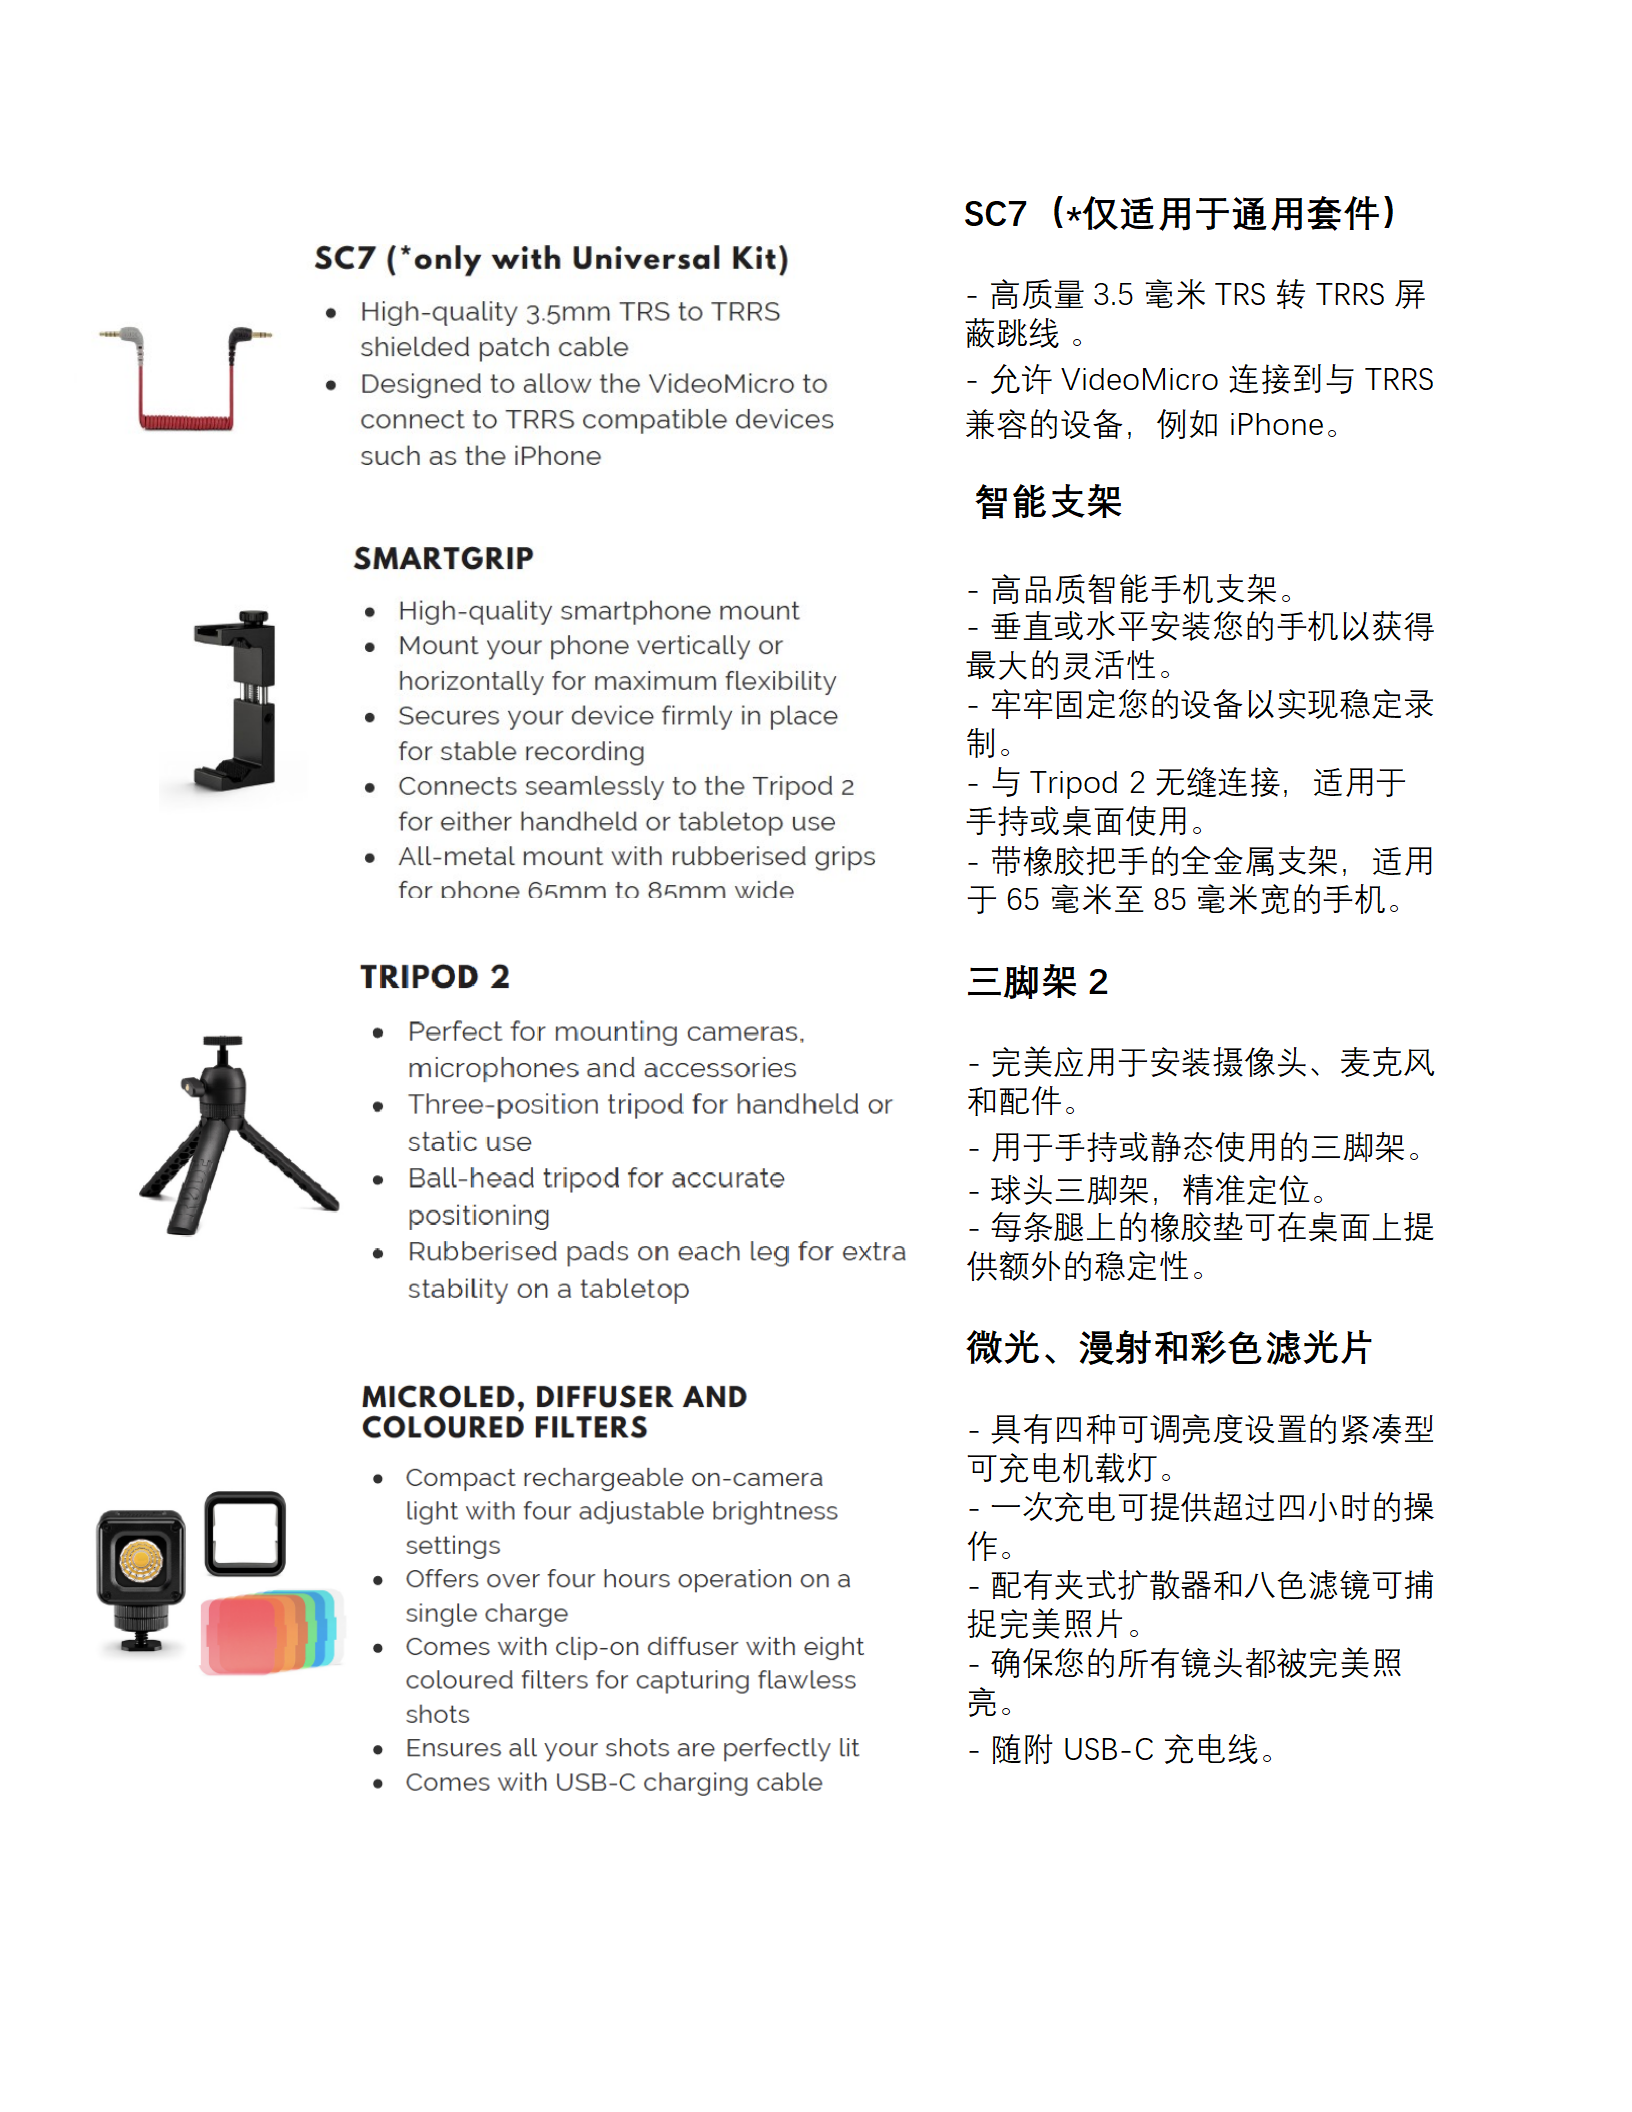 Vlogger Kit Feature Highlights and Explainer 中英_05.png